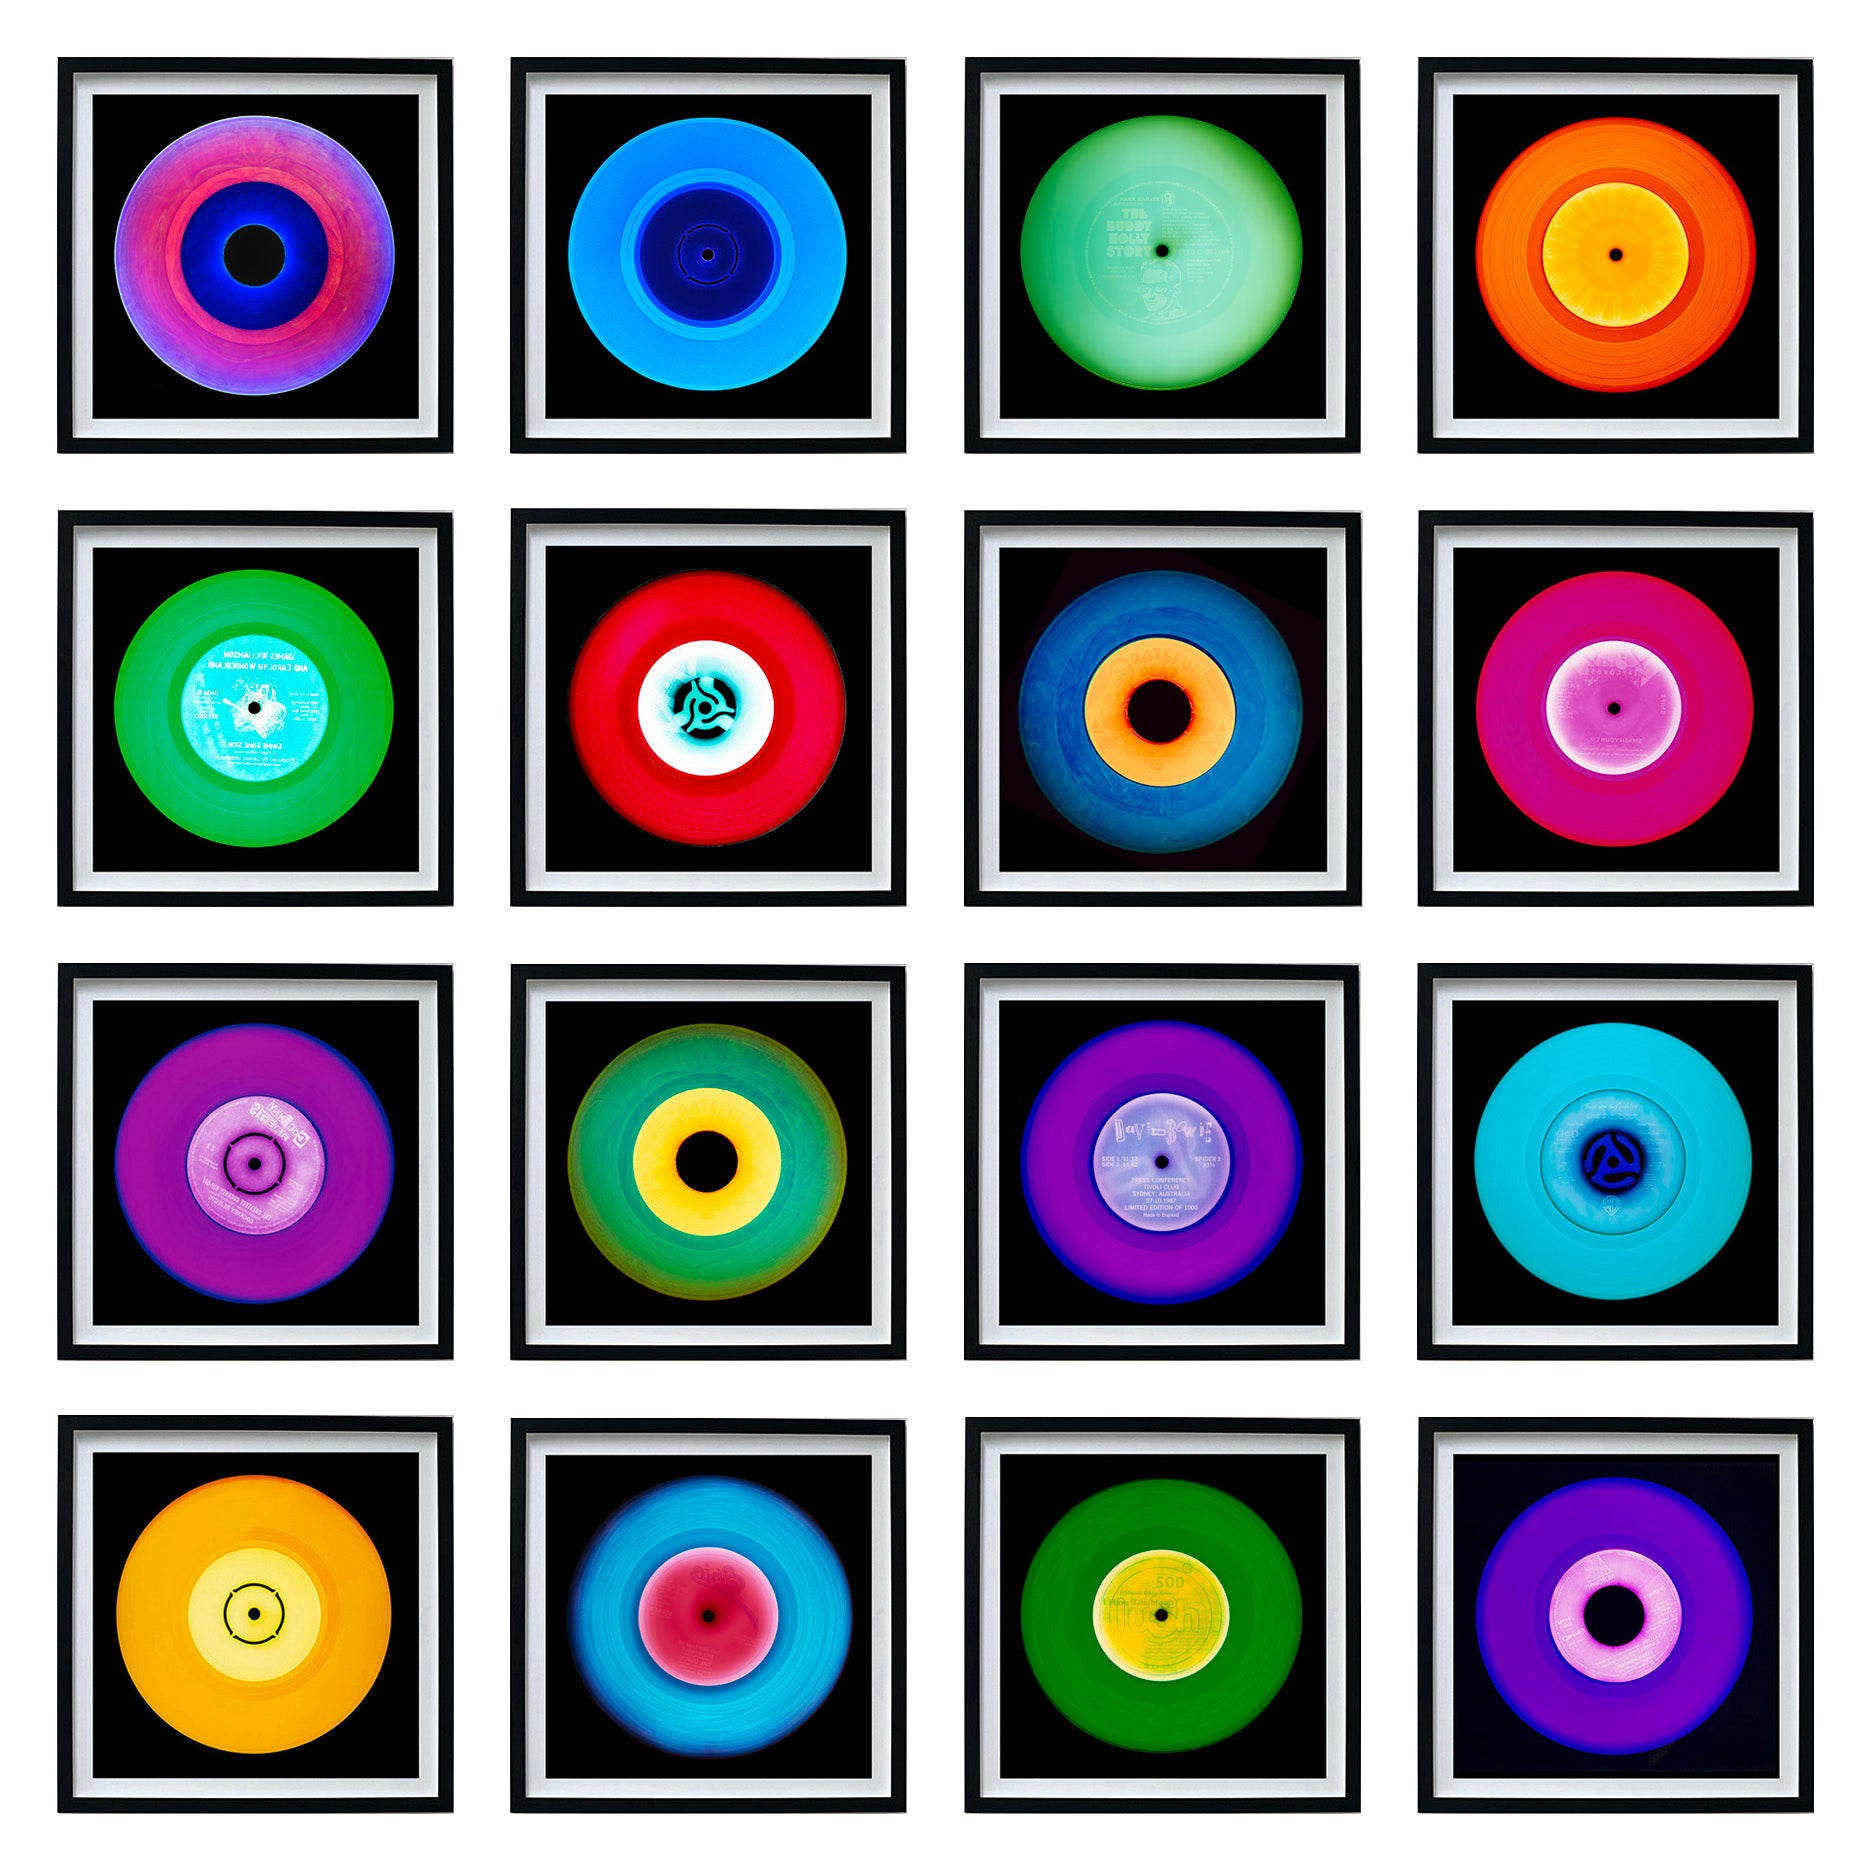 Heidler and Heeps vinyl record collection 16 piece multi-colour installation art